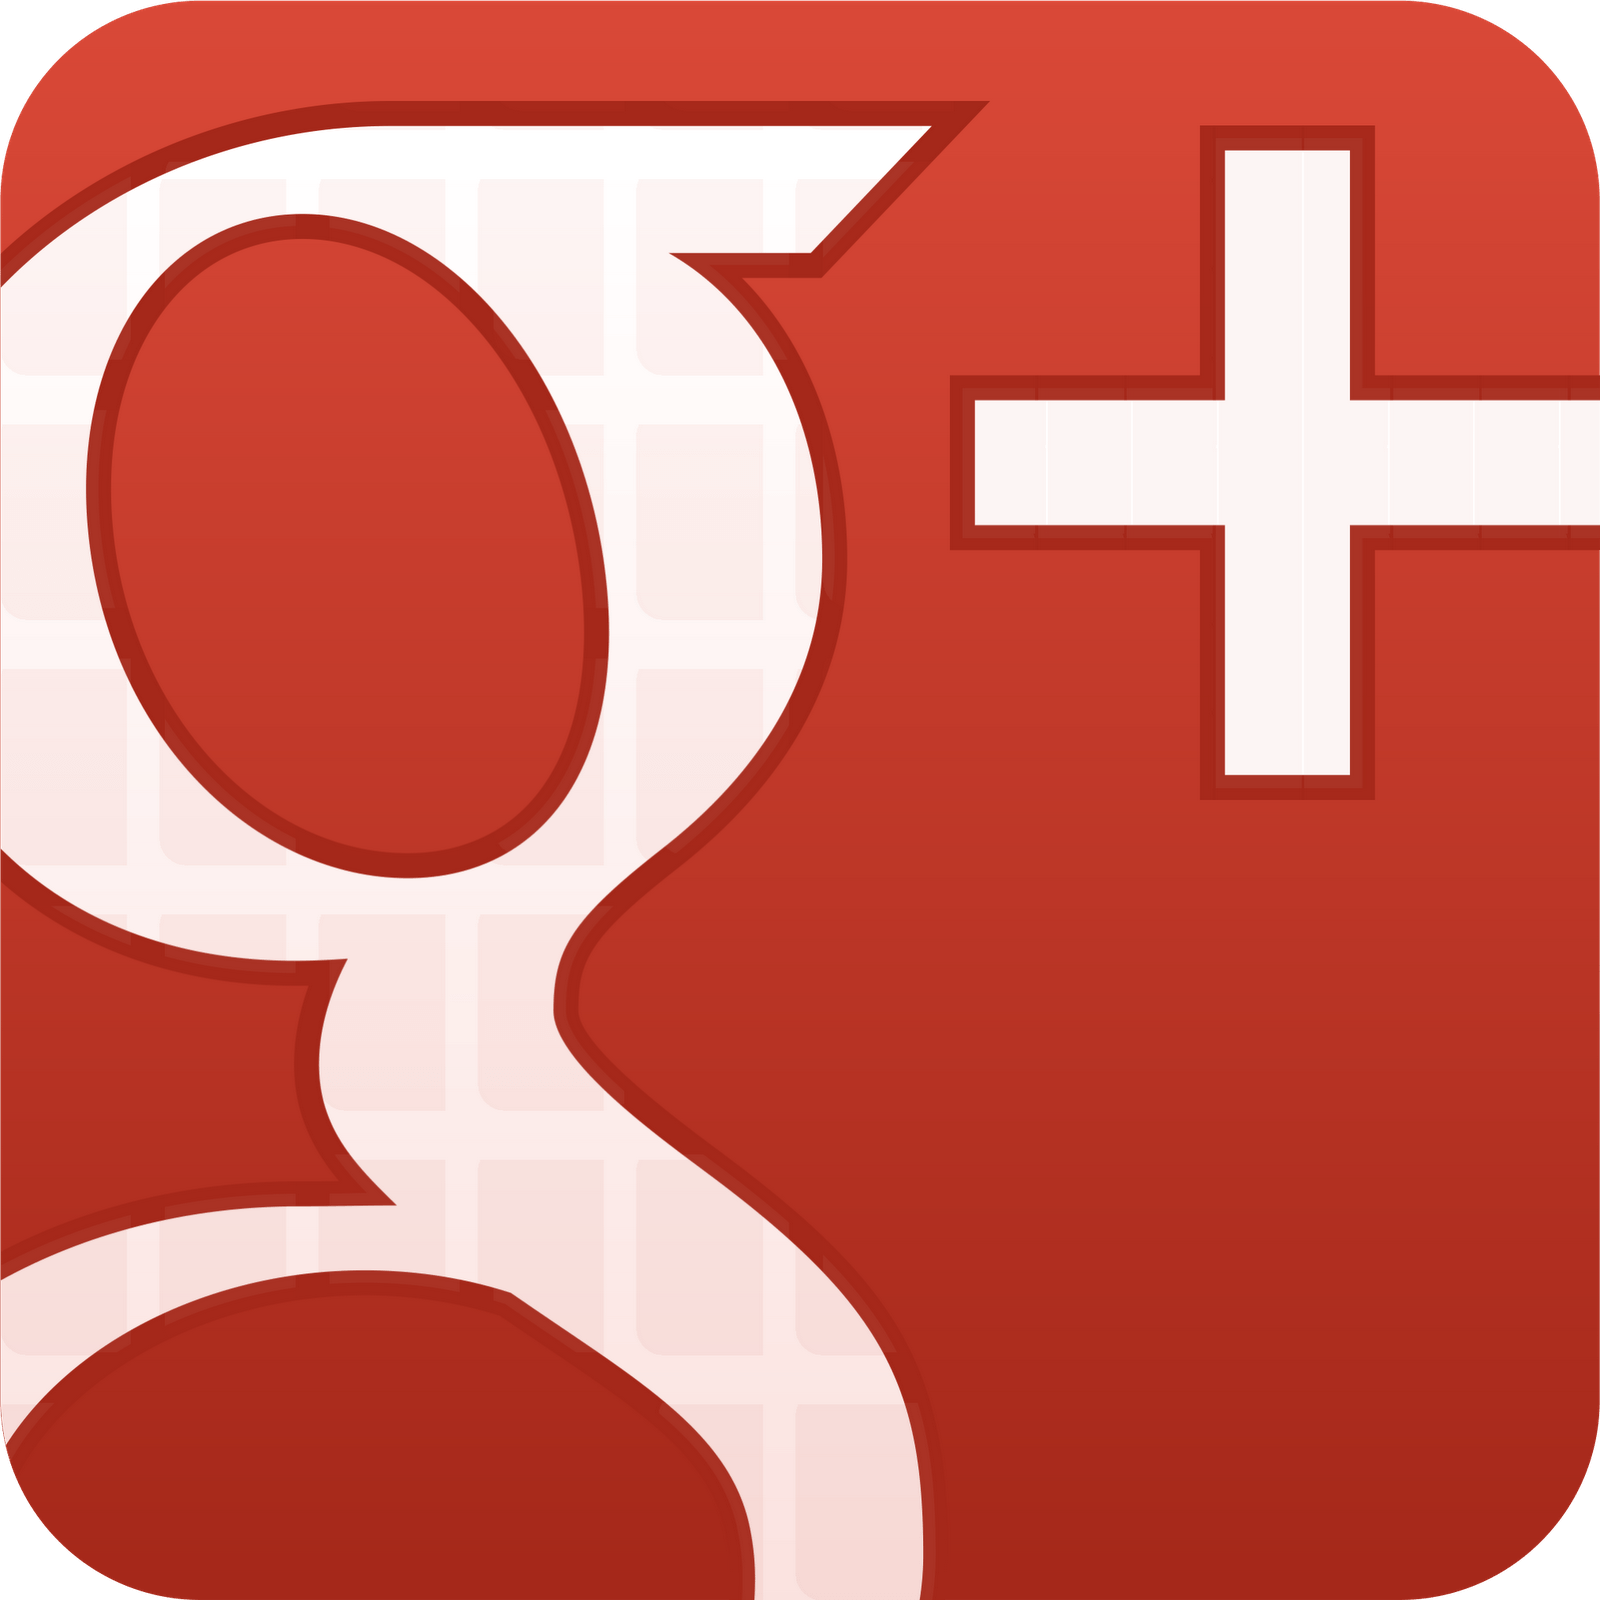 Google Plus App Logo - Google Plus Logo Transparent PNG Pictures - Free Icons and PNG ...